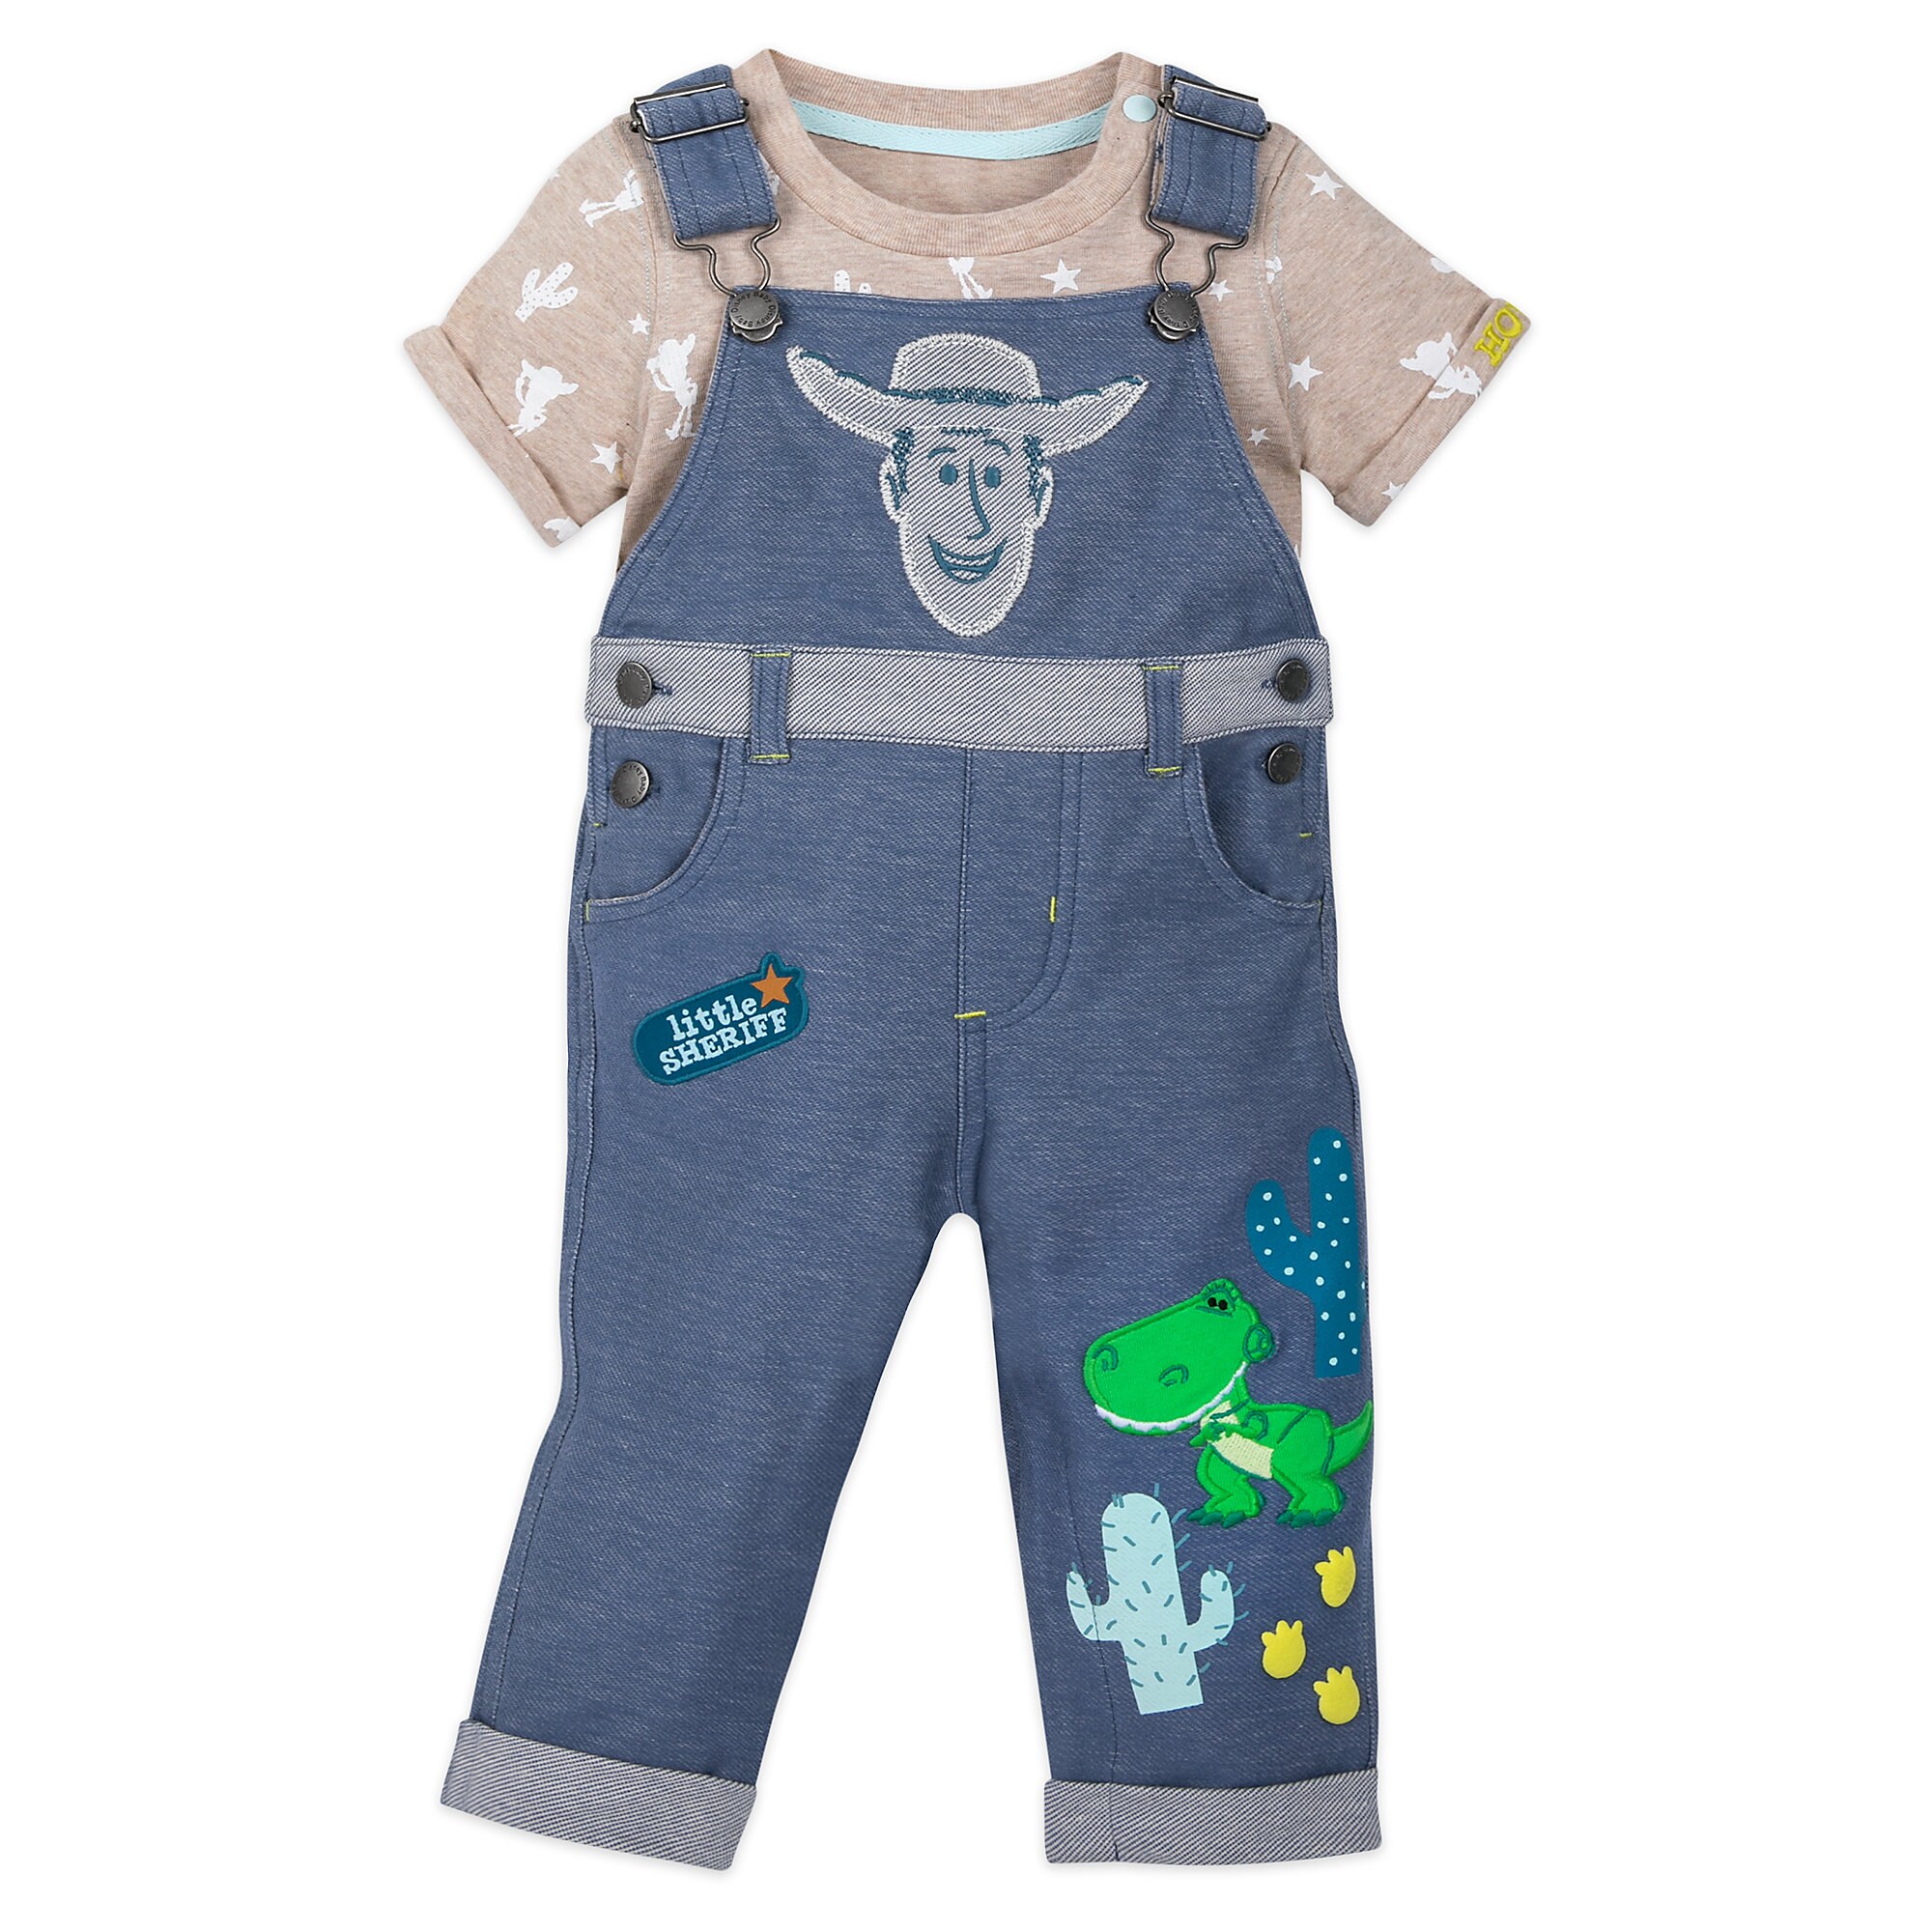 Toy Story Dungaree Set for Baby